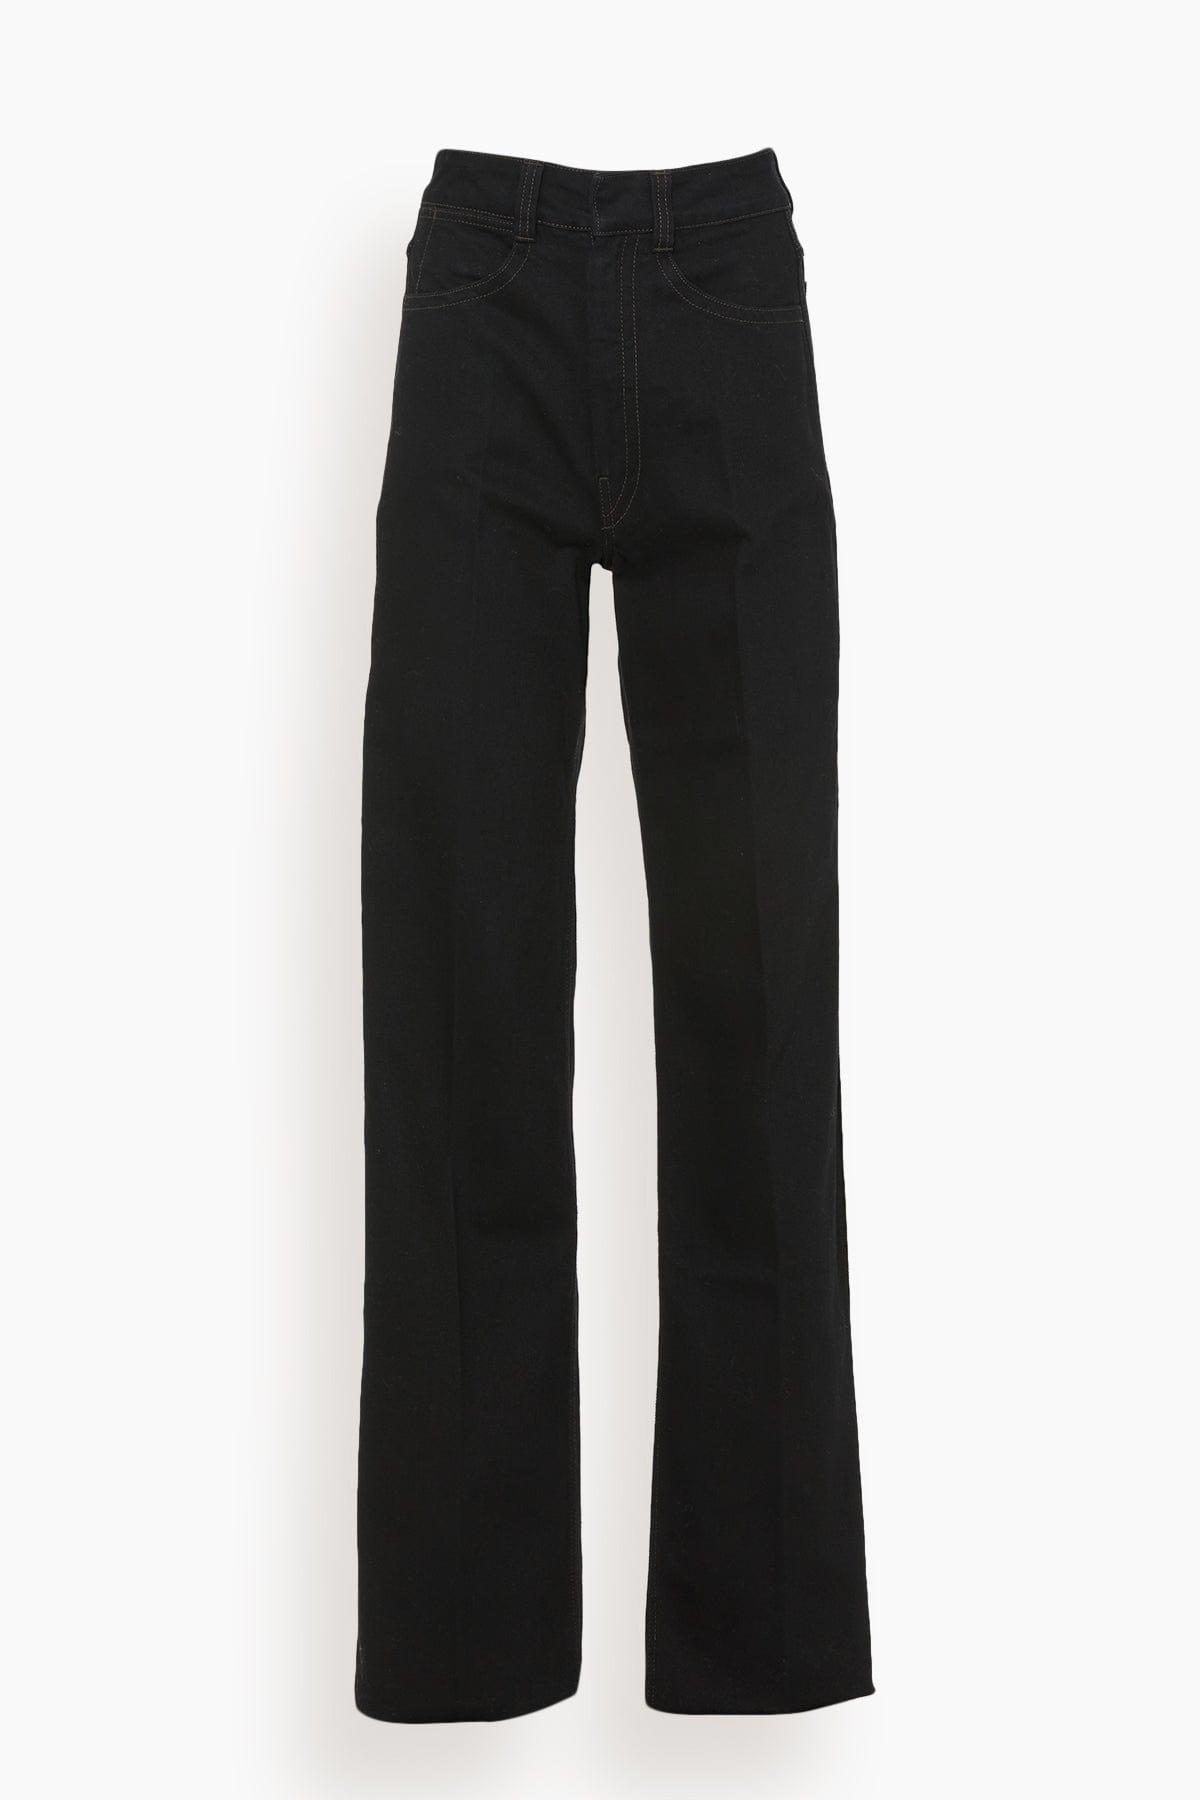 Lemaire Denim High Waisted Pant in Black | Lyst